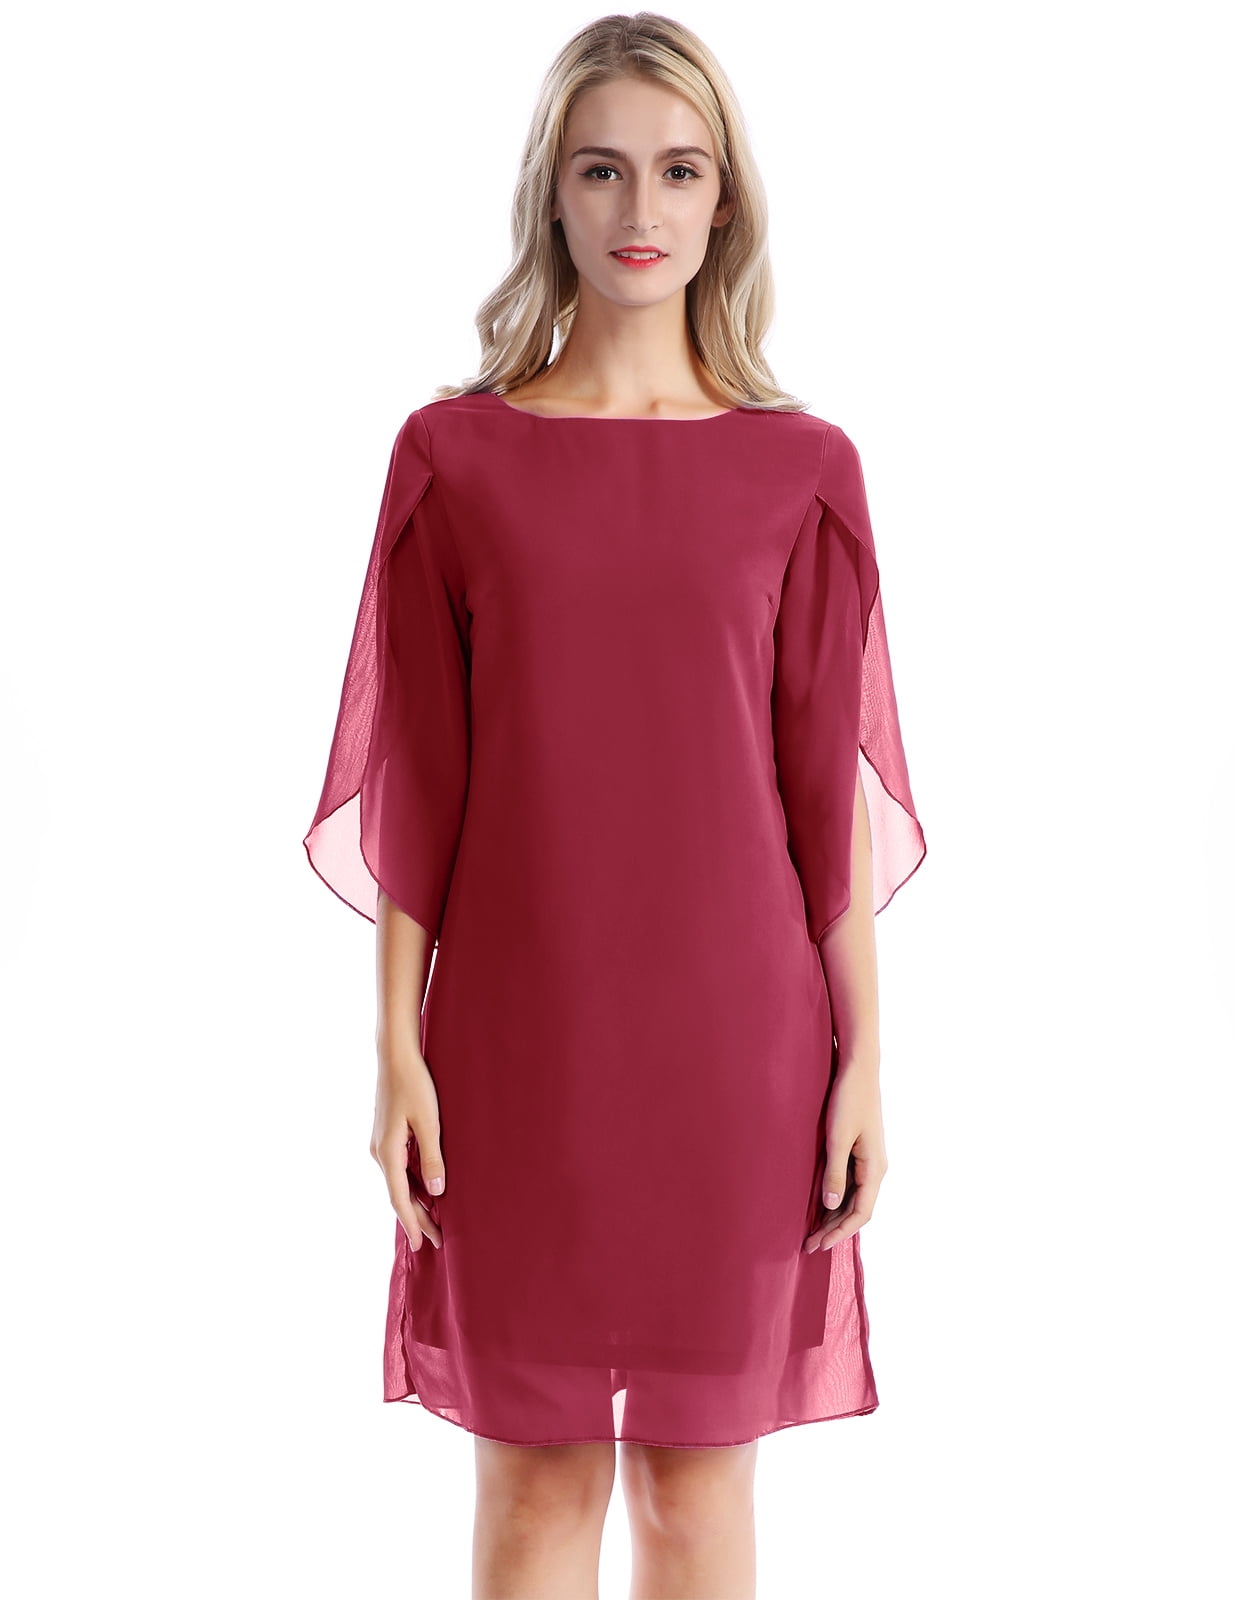 Loose Fitting Formal Dresses Factory ...